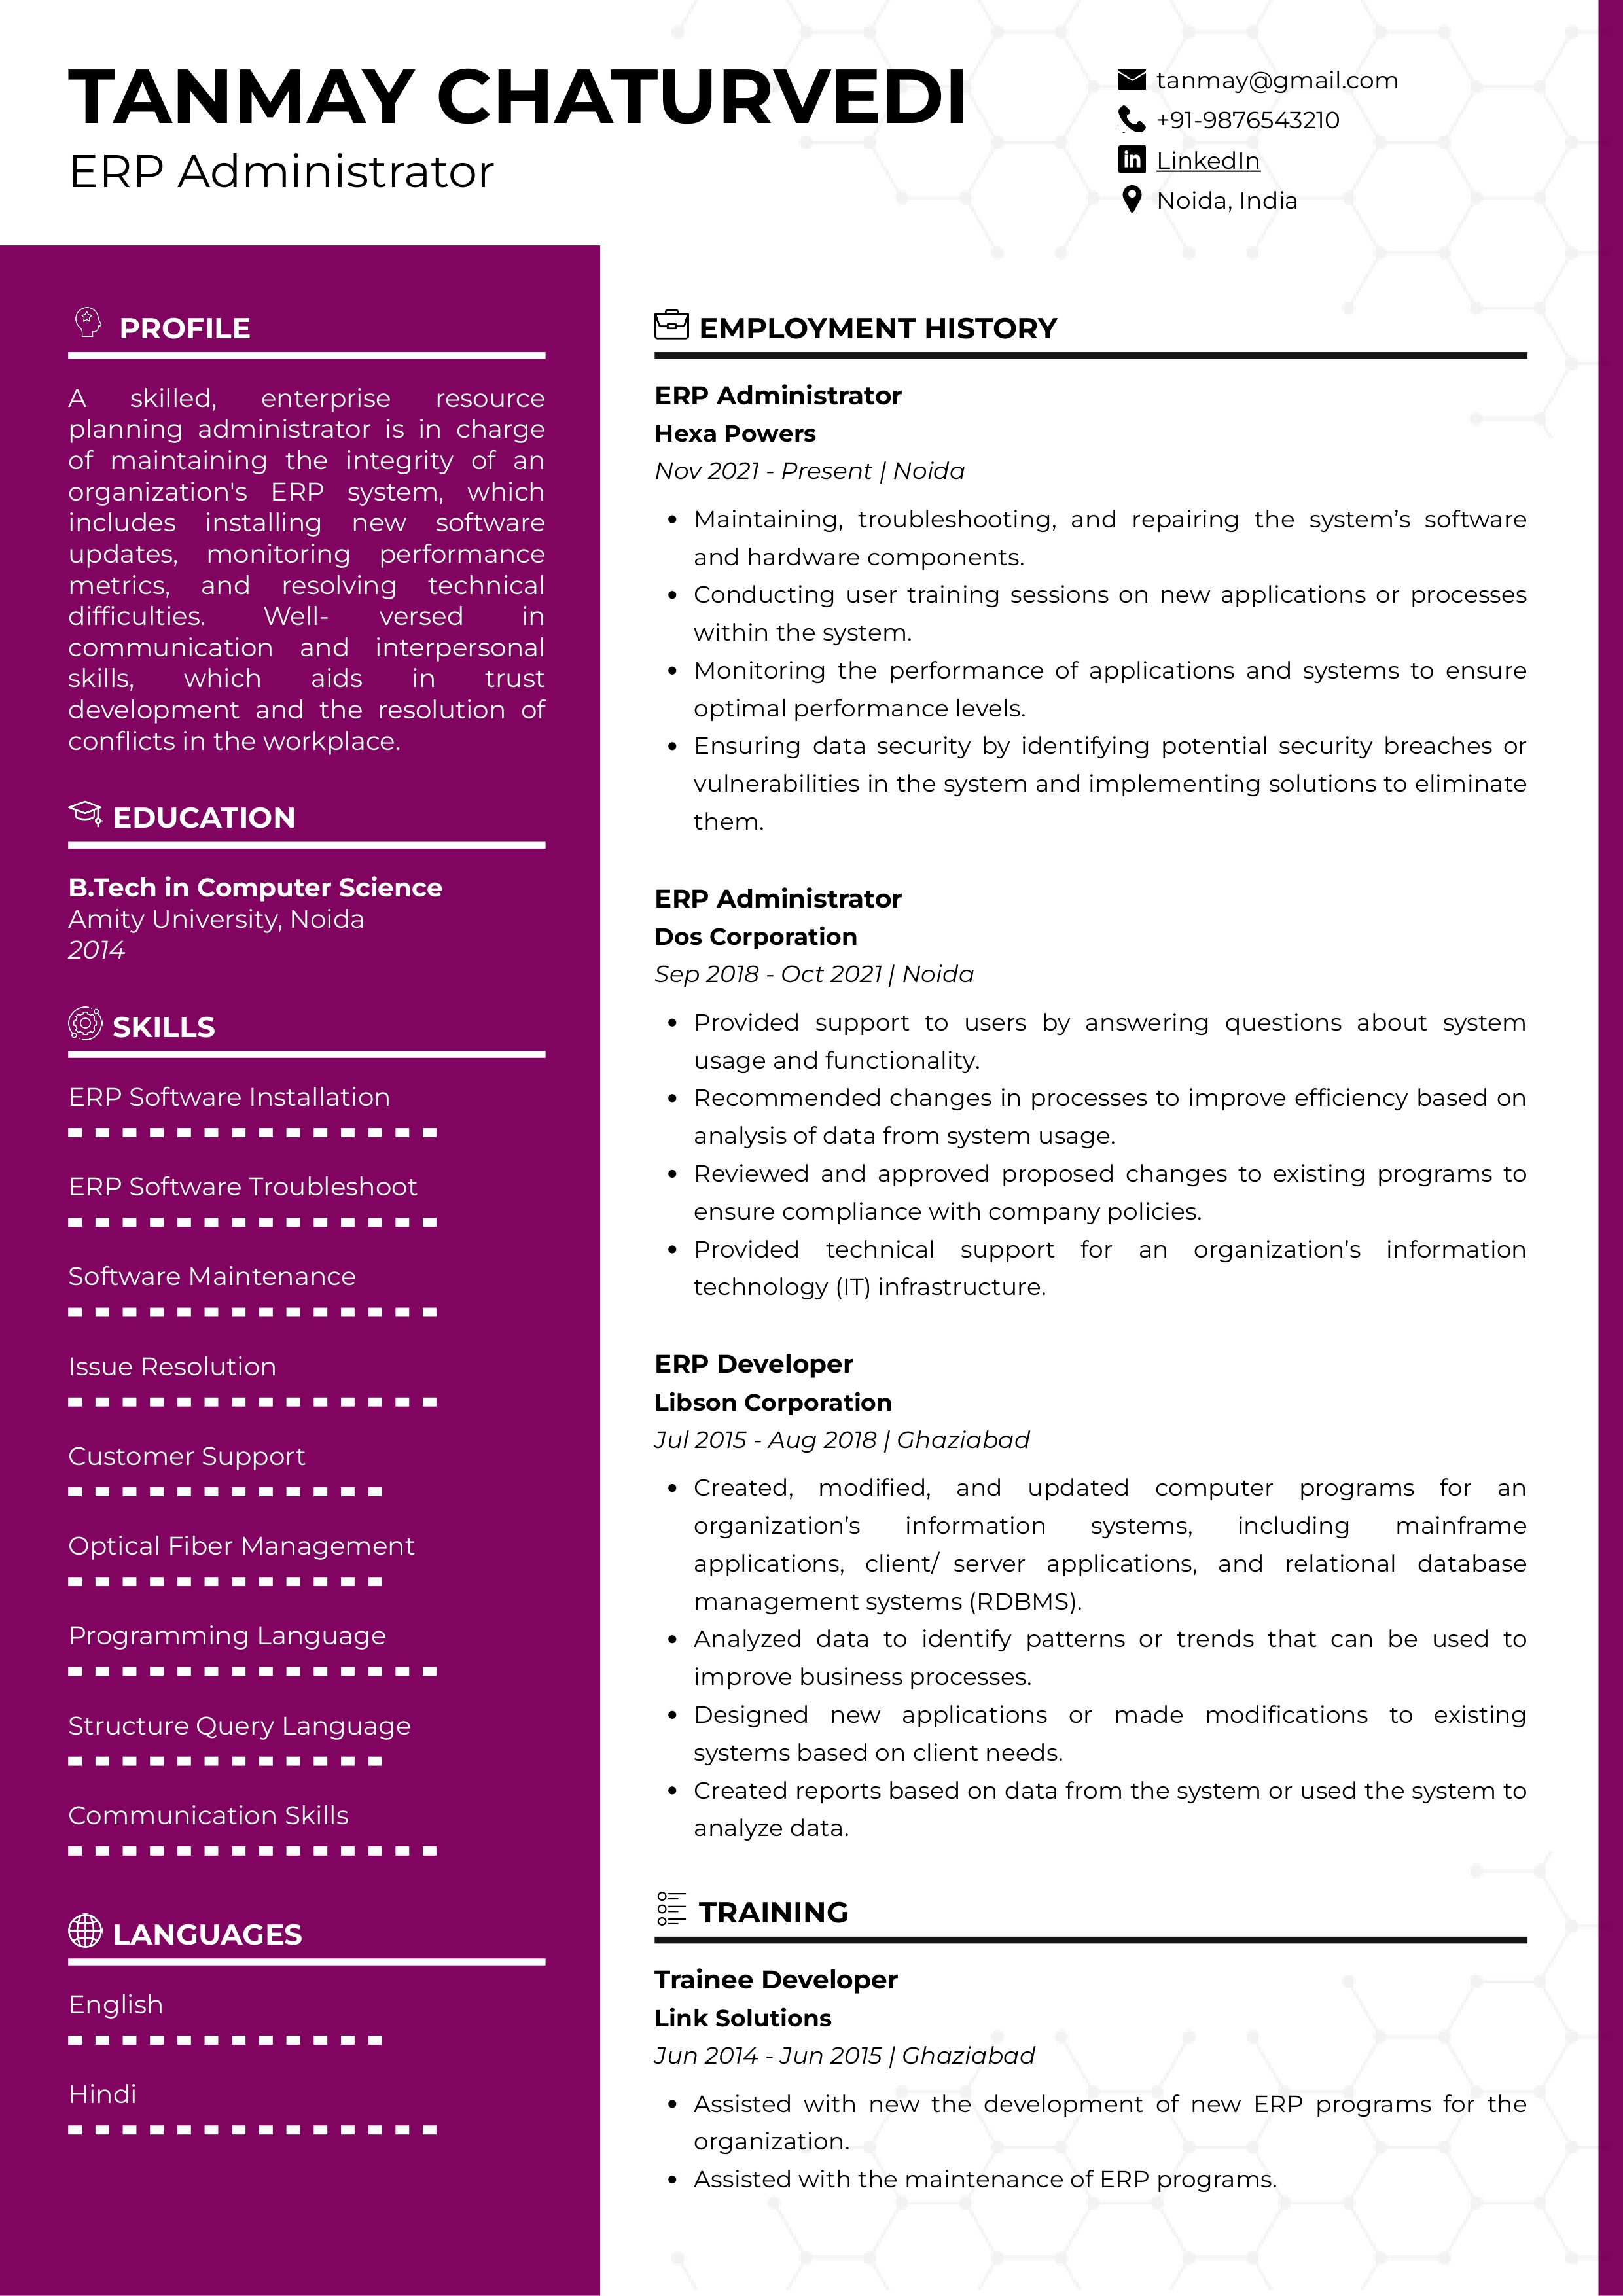 Sample Resume of ERP Administrator | Free Resume Templates & Samples on Resumod.co